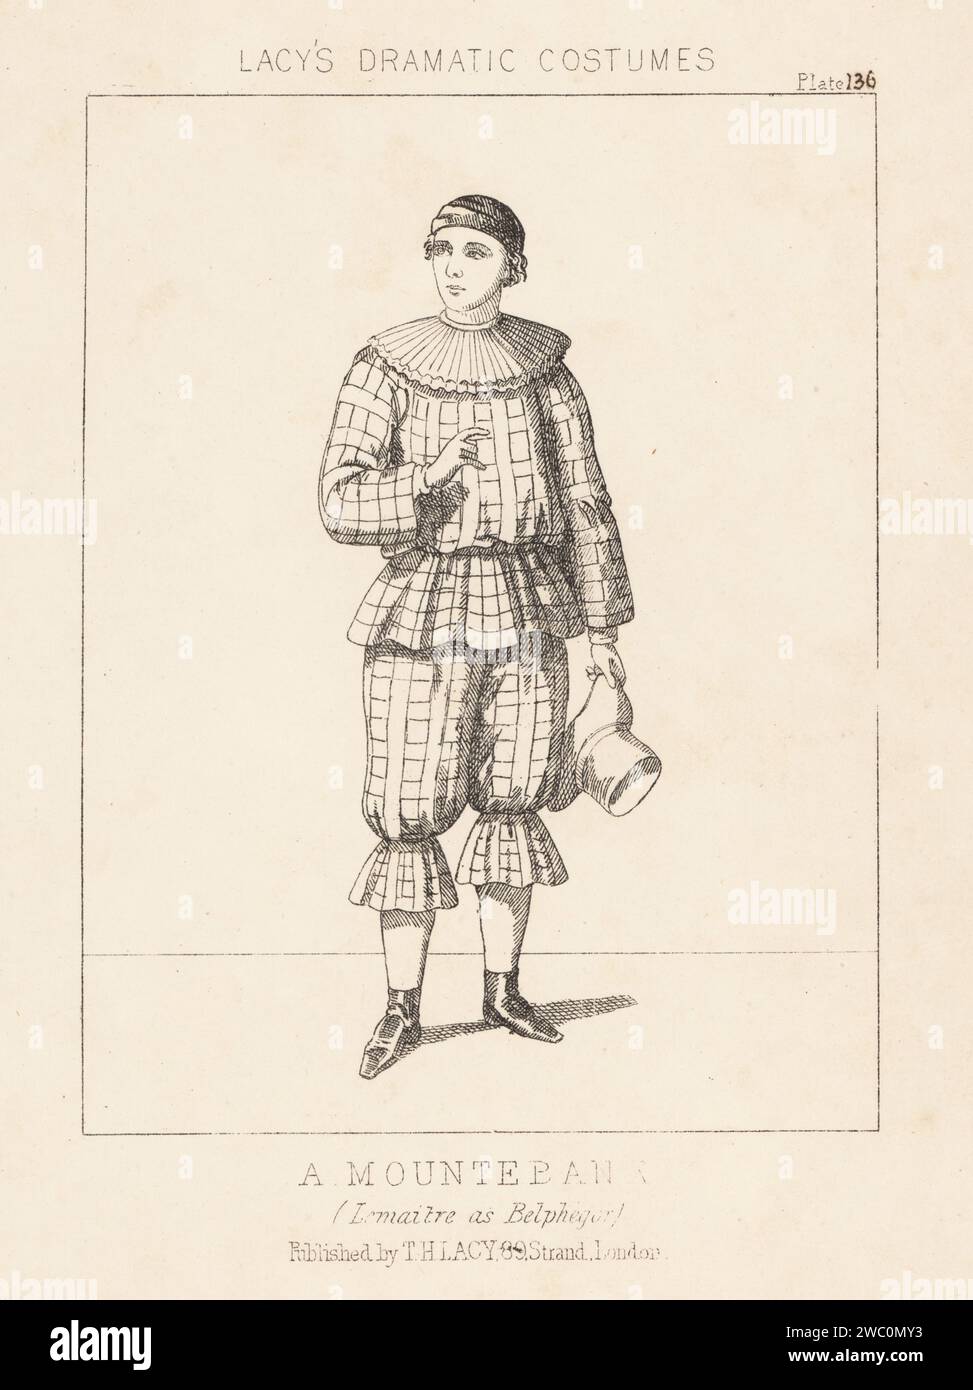 French actor and playwright Frederick Lemaitre as Belphégor in the play Paillasse (or Belphegor the Mountebank) by Adolphe d'Ennery, Adelphi Theatre, London, 1851. In cap, ruff collar, checkered tunic and pants, holding a hat. Lithograph from Thomas Hailes Lacy's Male Costumes, Historical, National and Dramatic in 200 Plates, London, 1865. Lacy (1809-1873) was a British actor, playwright, theatrical manager and publisher. Stock Photo